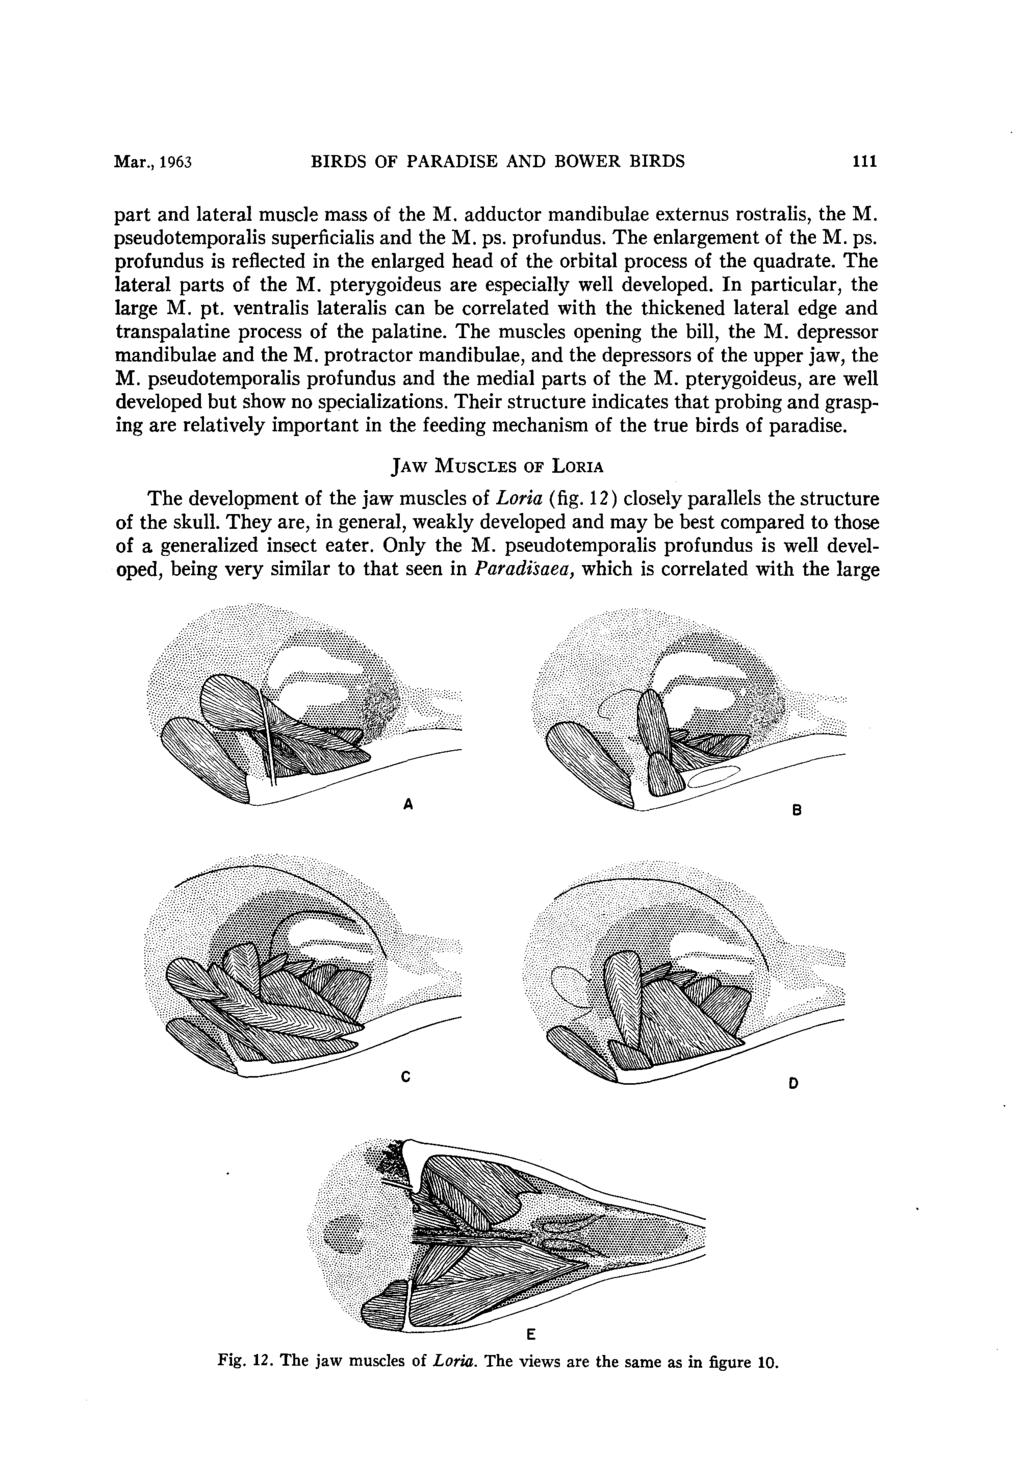 Mar., 1963 BIRDS OF PARADISE AND BOWER BIRDS 111 part and lateral muscle mass of the M. adductor mandibulae externus rostra&, the M. pseudotemporalis superficialis and the M. ps. profundus.